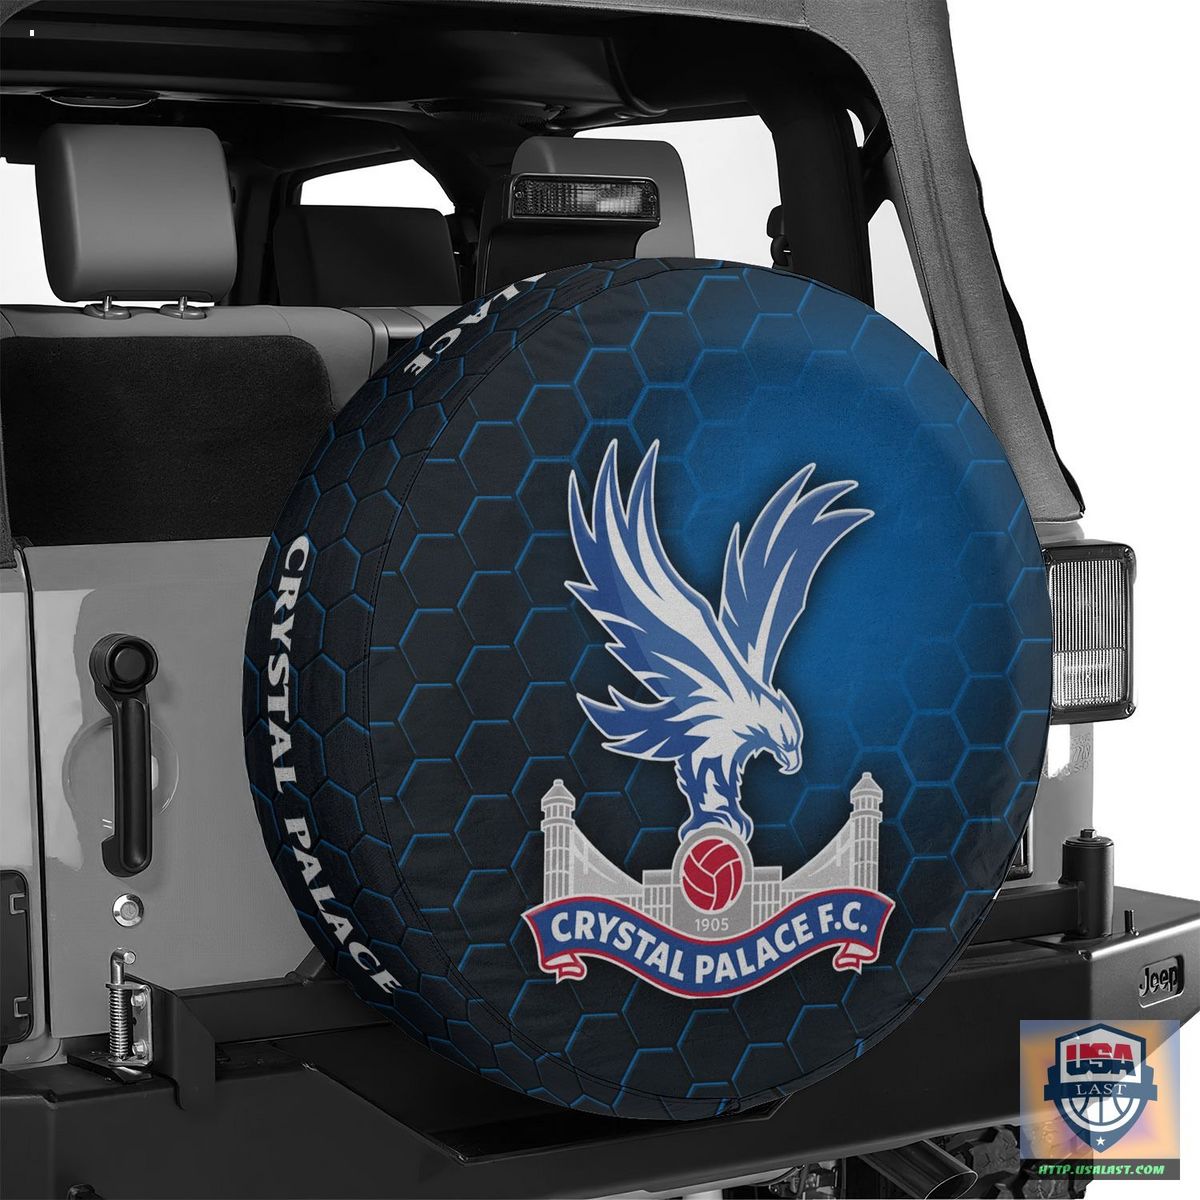 AMAZING Crystal Palace FC Spare Tire Cover